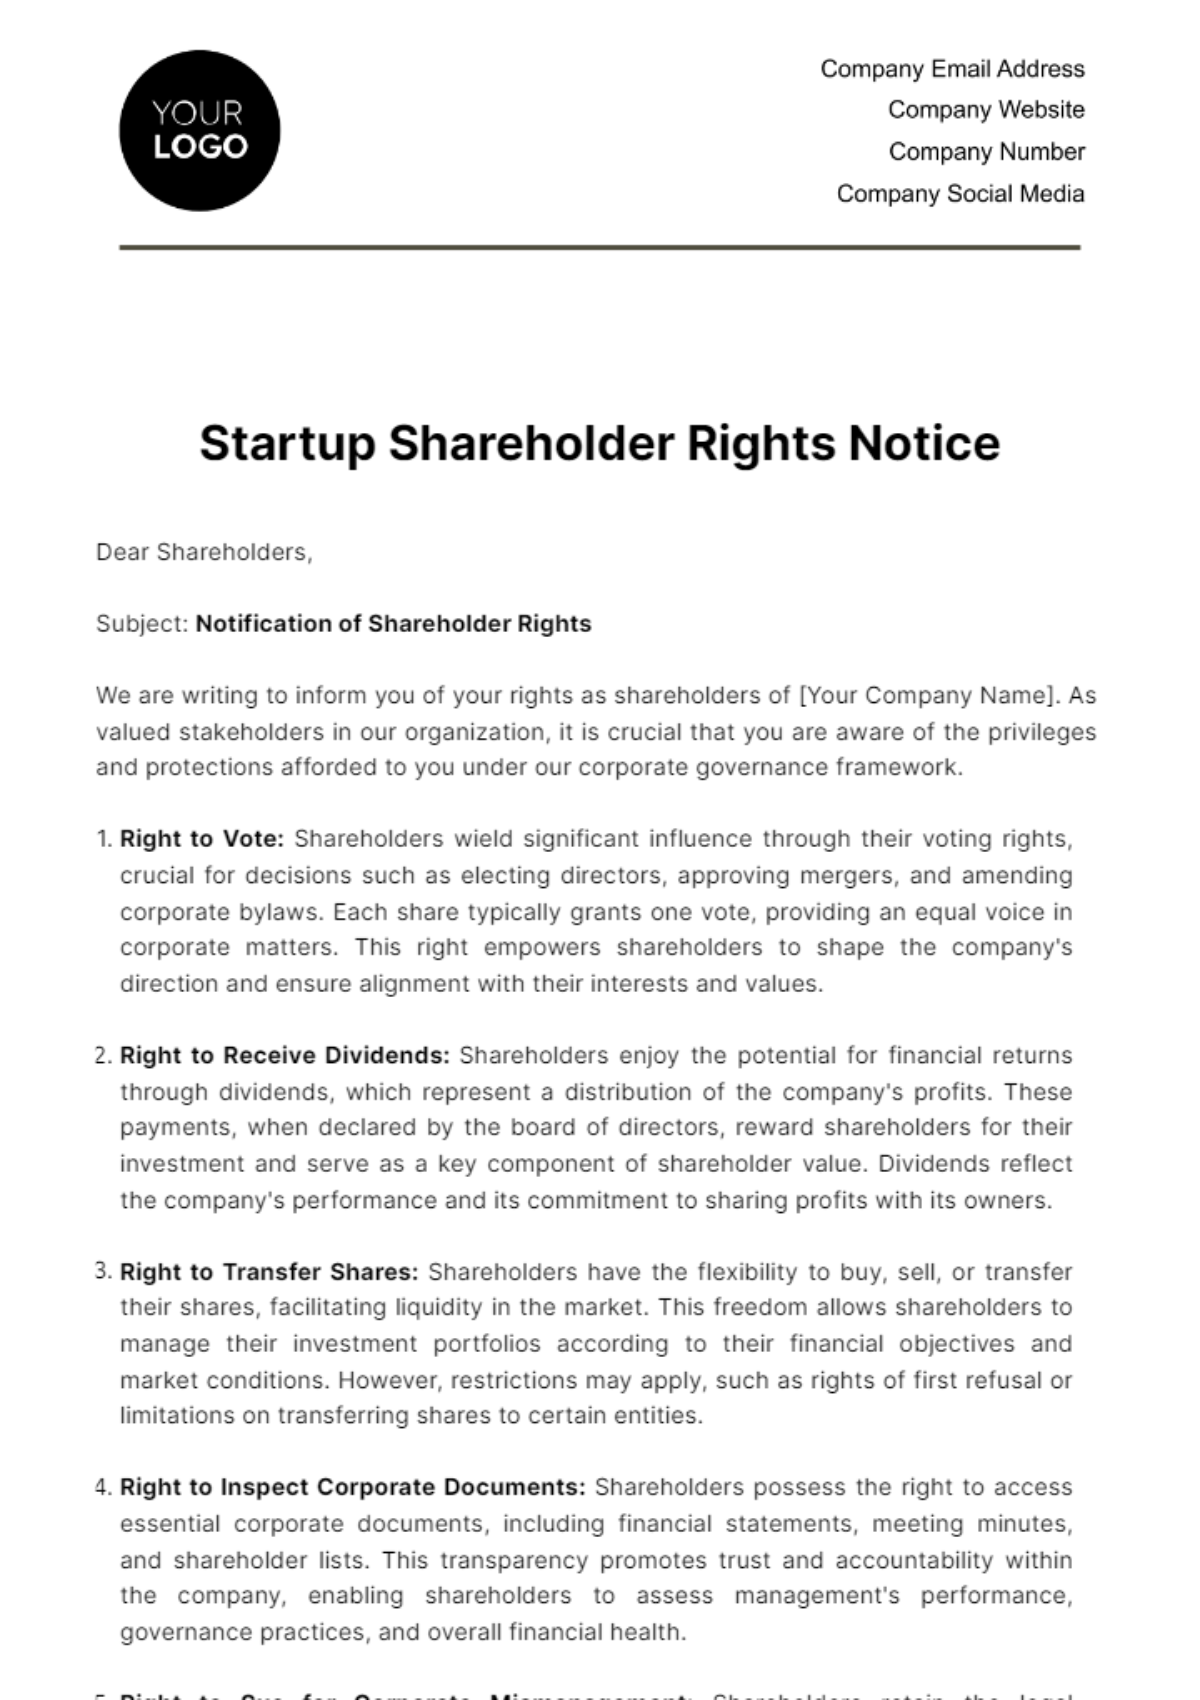 Free Startup Shareholder Rights Notice Template